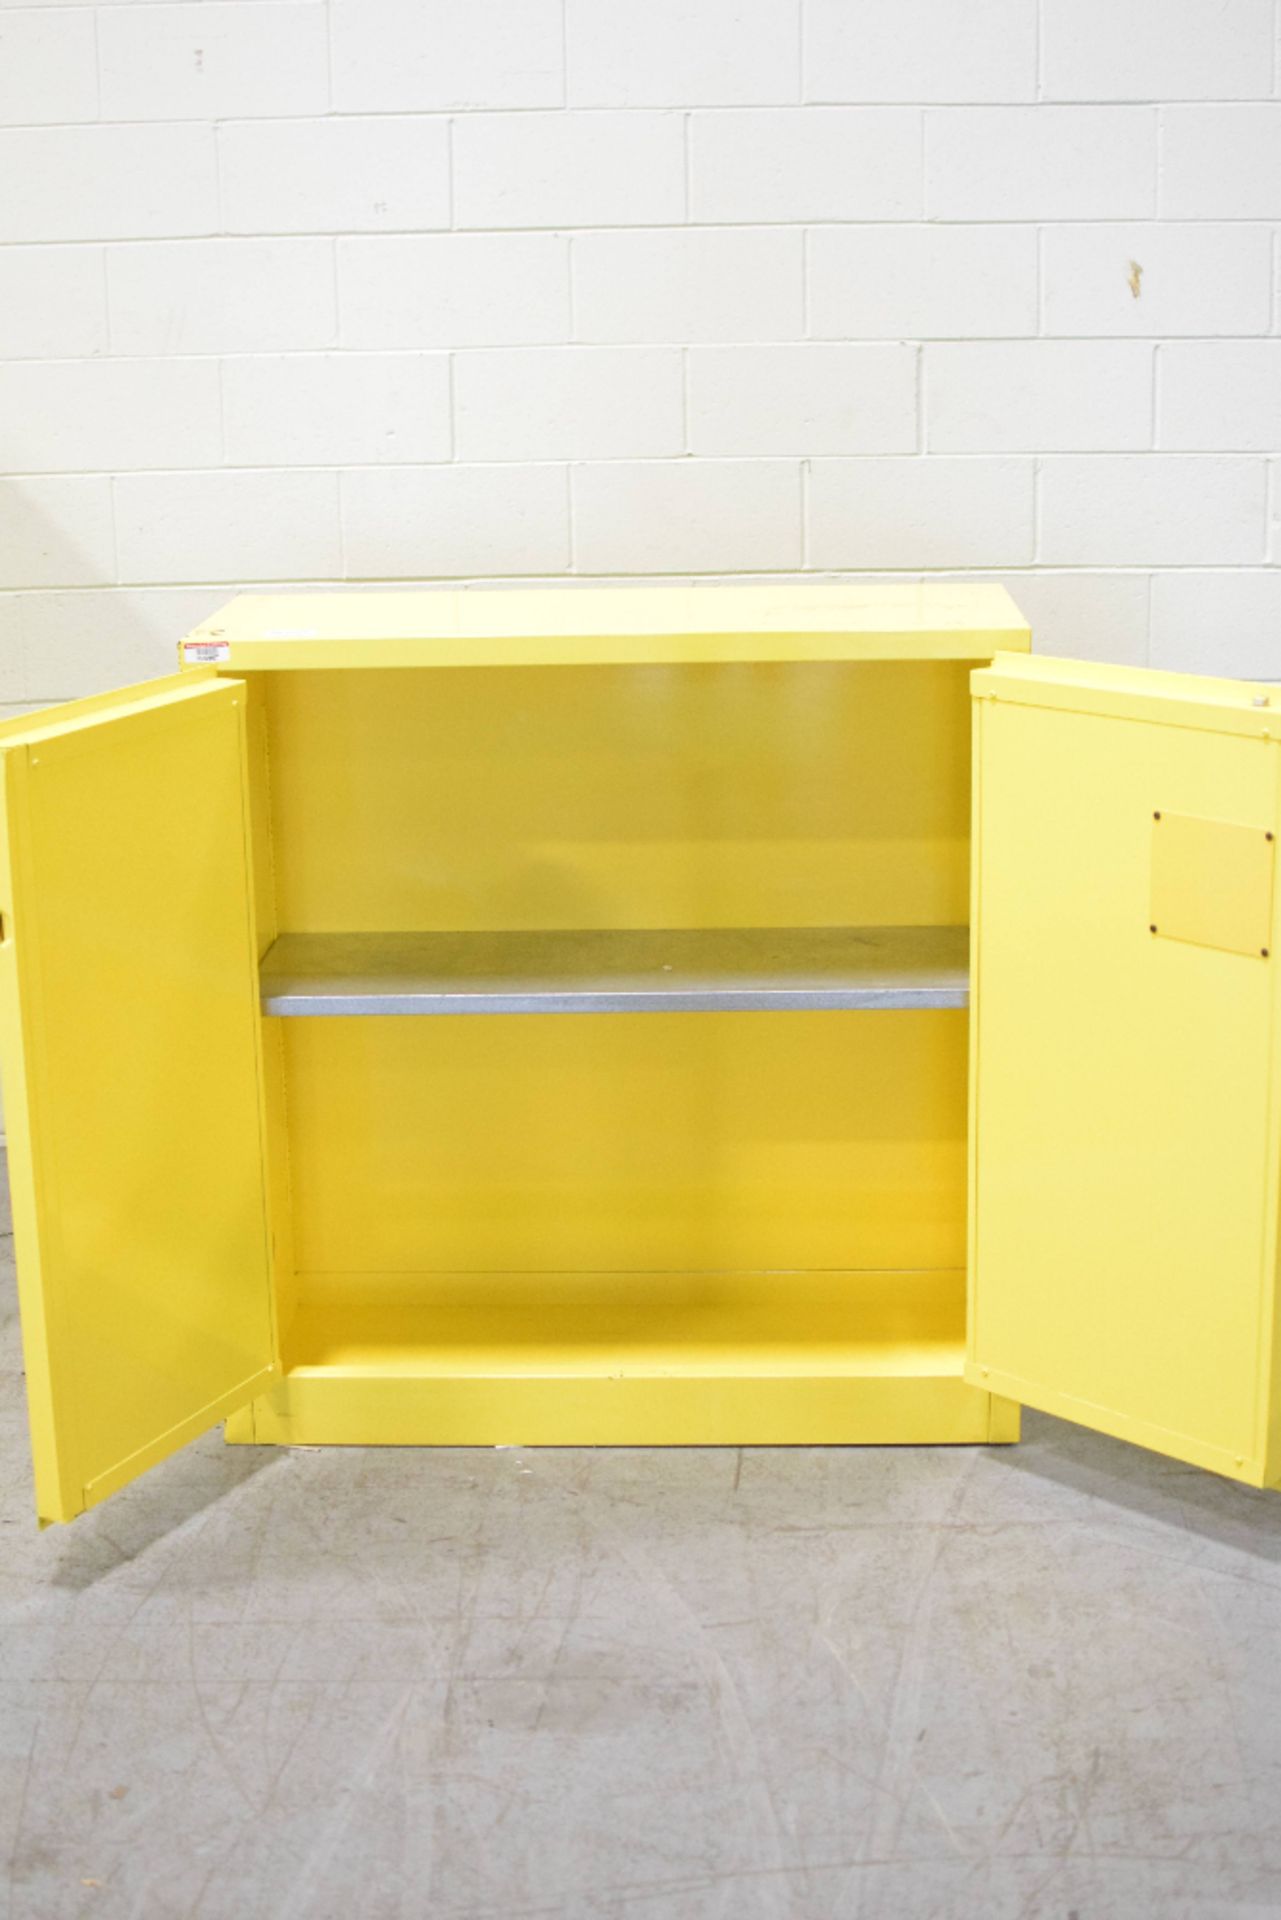 Justrite A130 Flammable Liquid Storage Cabinet - Image 2 of 2